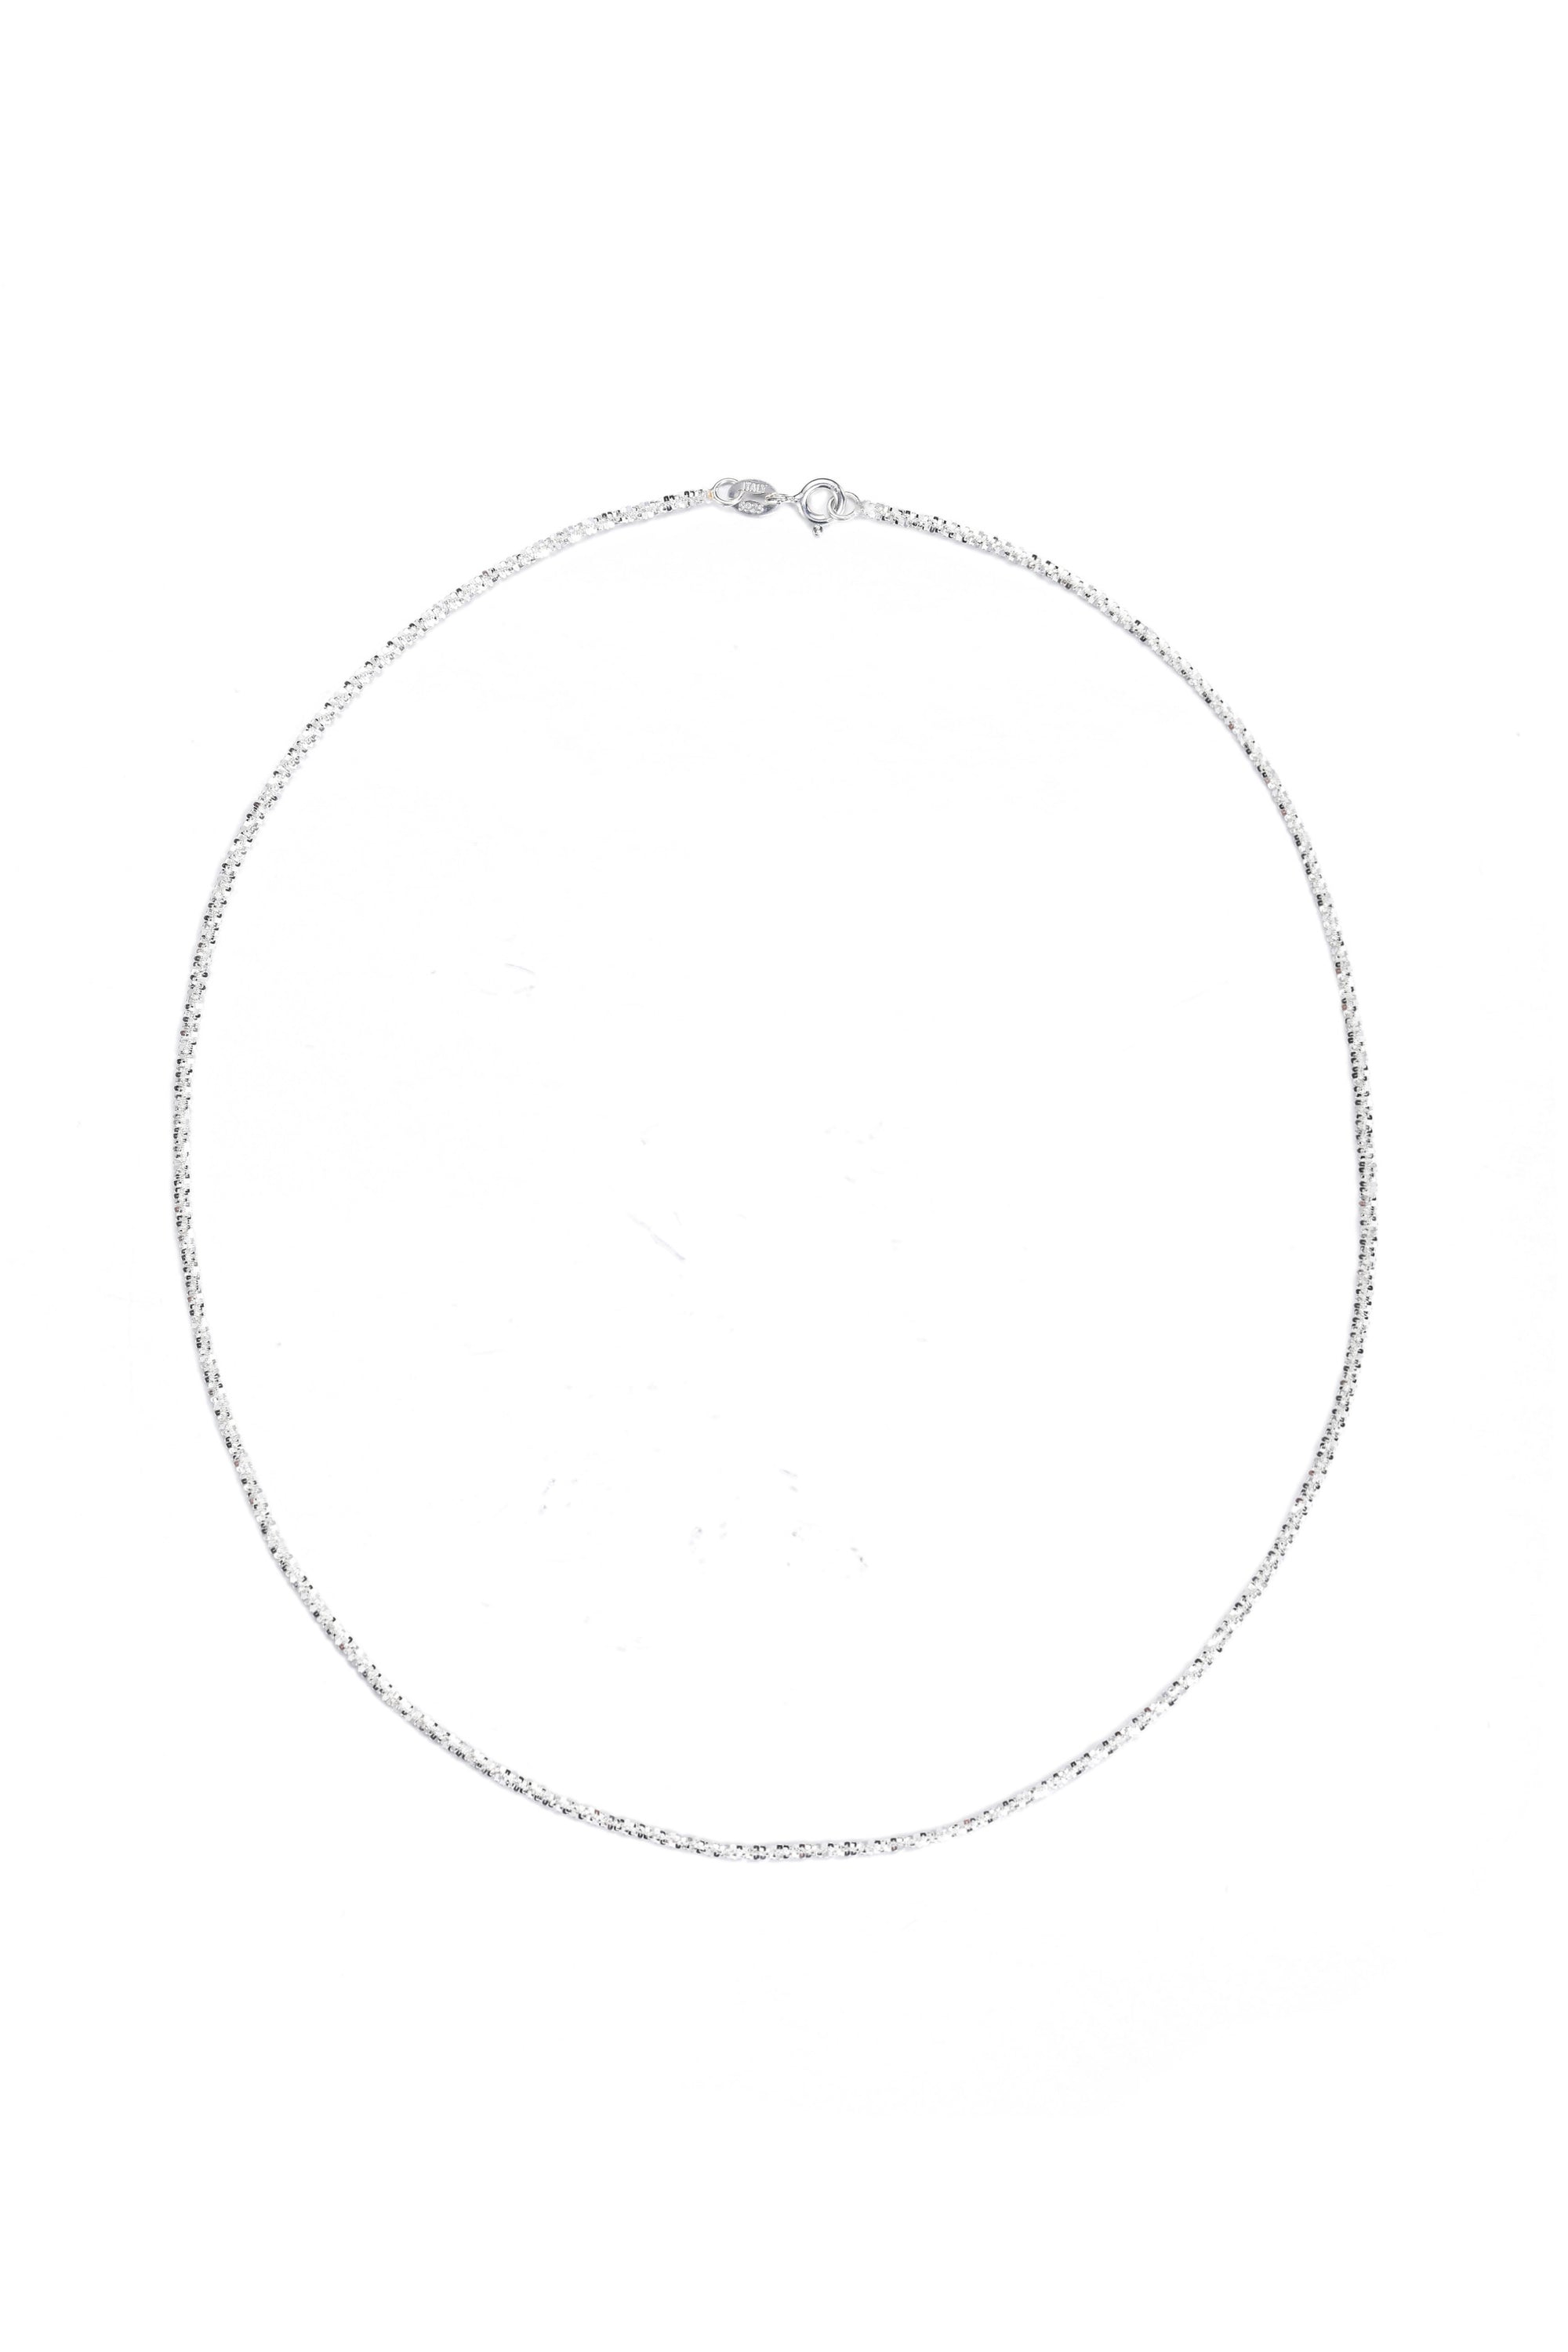 Handmade Snowflake Choker Necklace Sterling Silver White Background